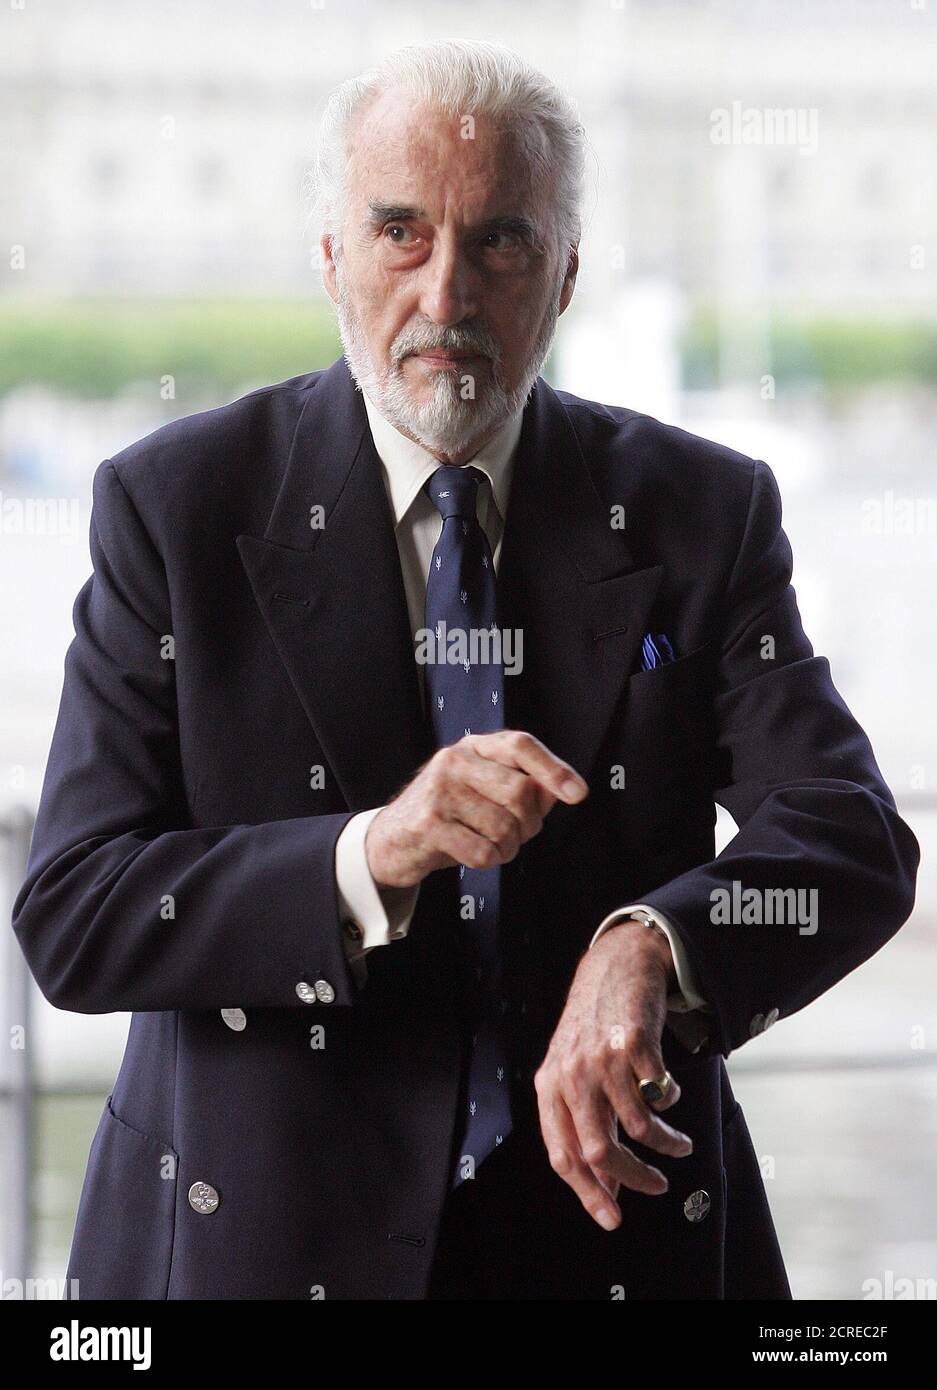 U.S. actor Christopher Lee arrives during the 45th Annual Rose d'Or Festival in Lucerne, Switzerland, May 7, 2005. The Festival Rose d'Or hosts the most prestigious international awards for entertainment television programmes. REUTERS/Pascal Lauener  PLA/AEM/YH Stock Photo